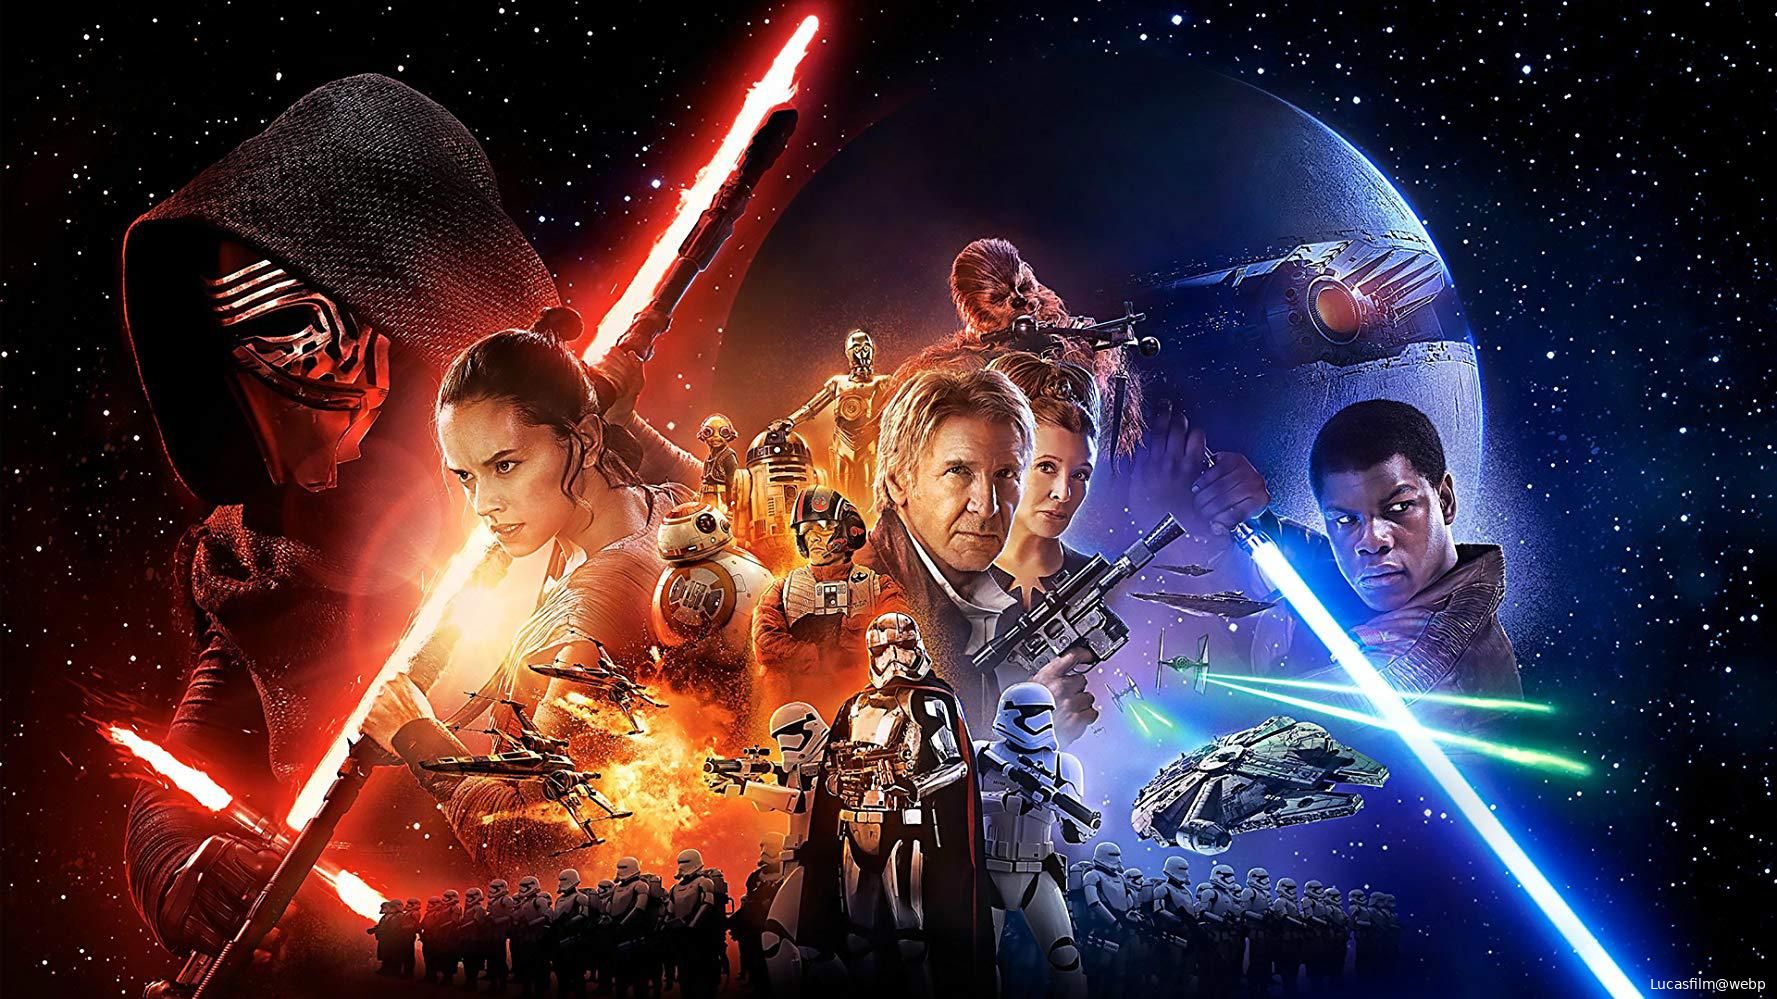 the force awakens wide posterf1576253921